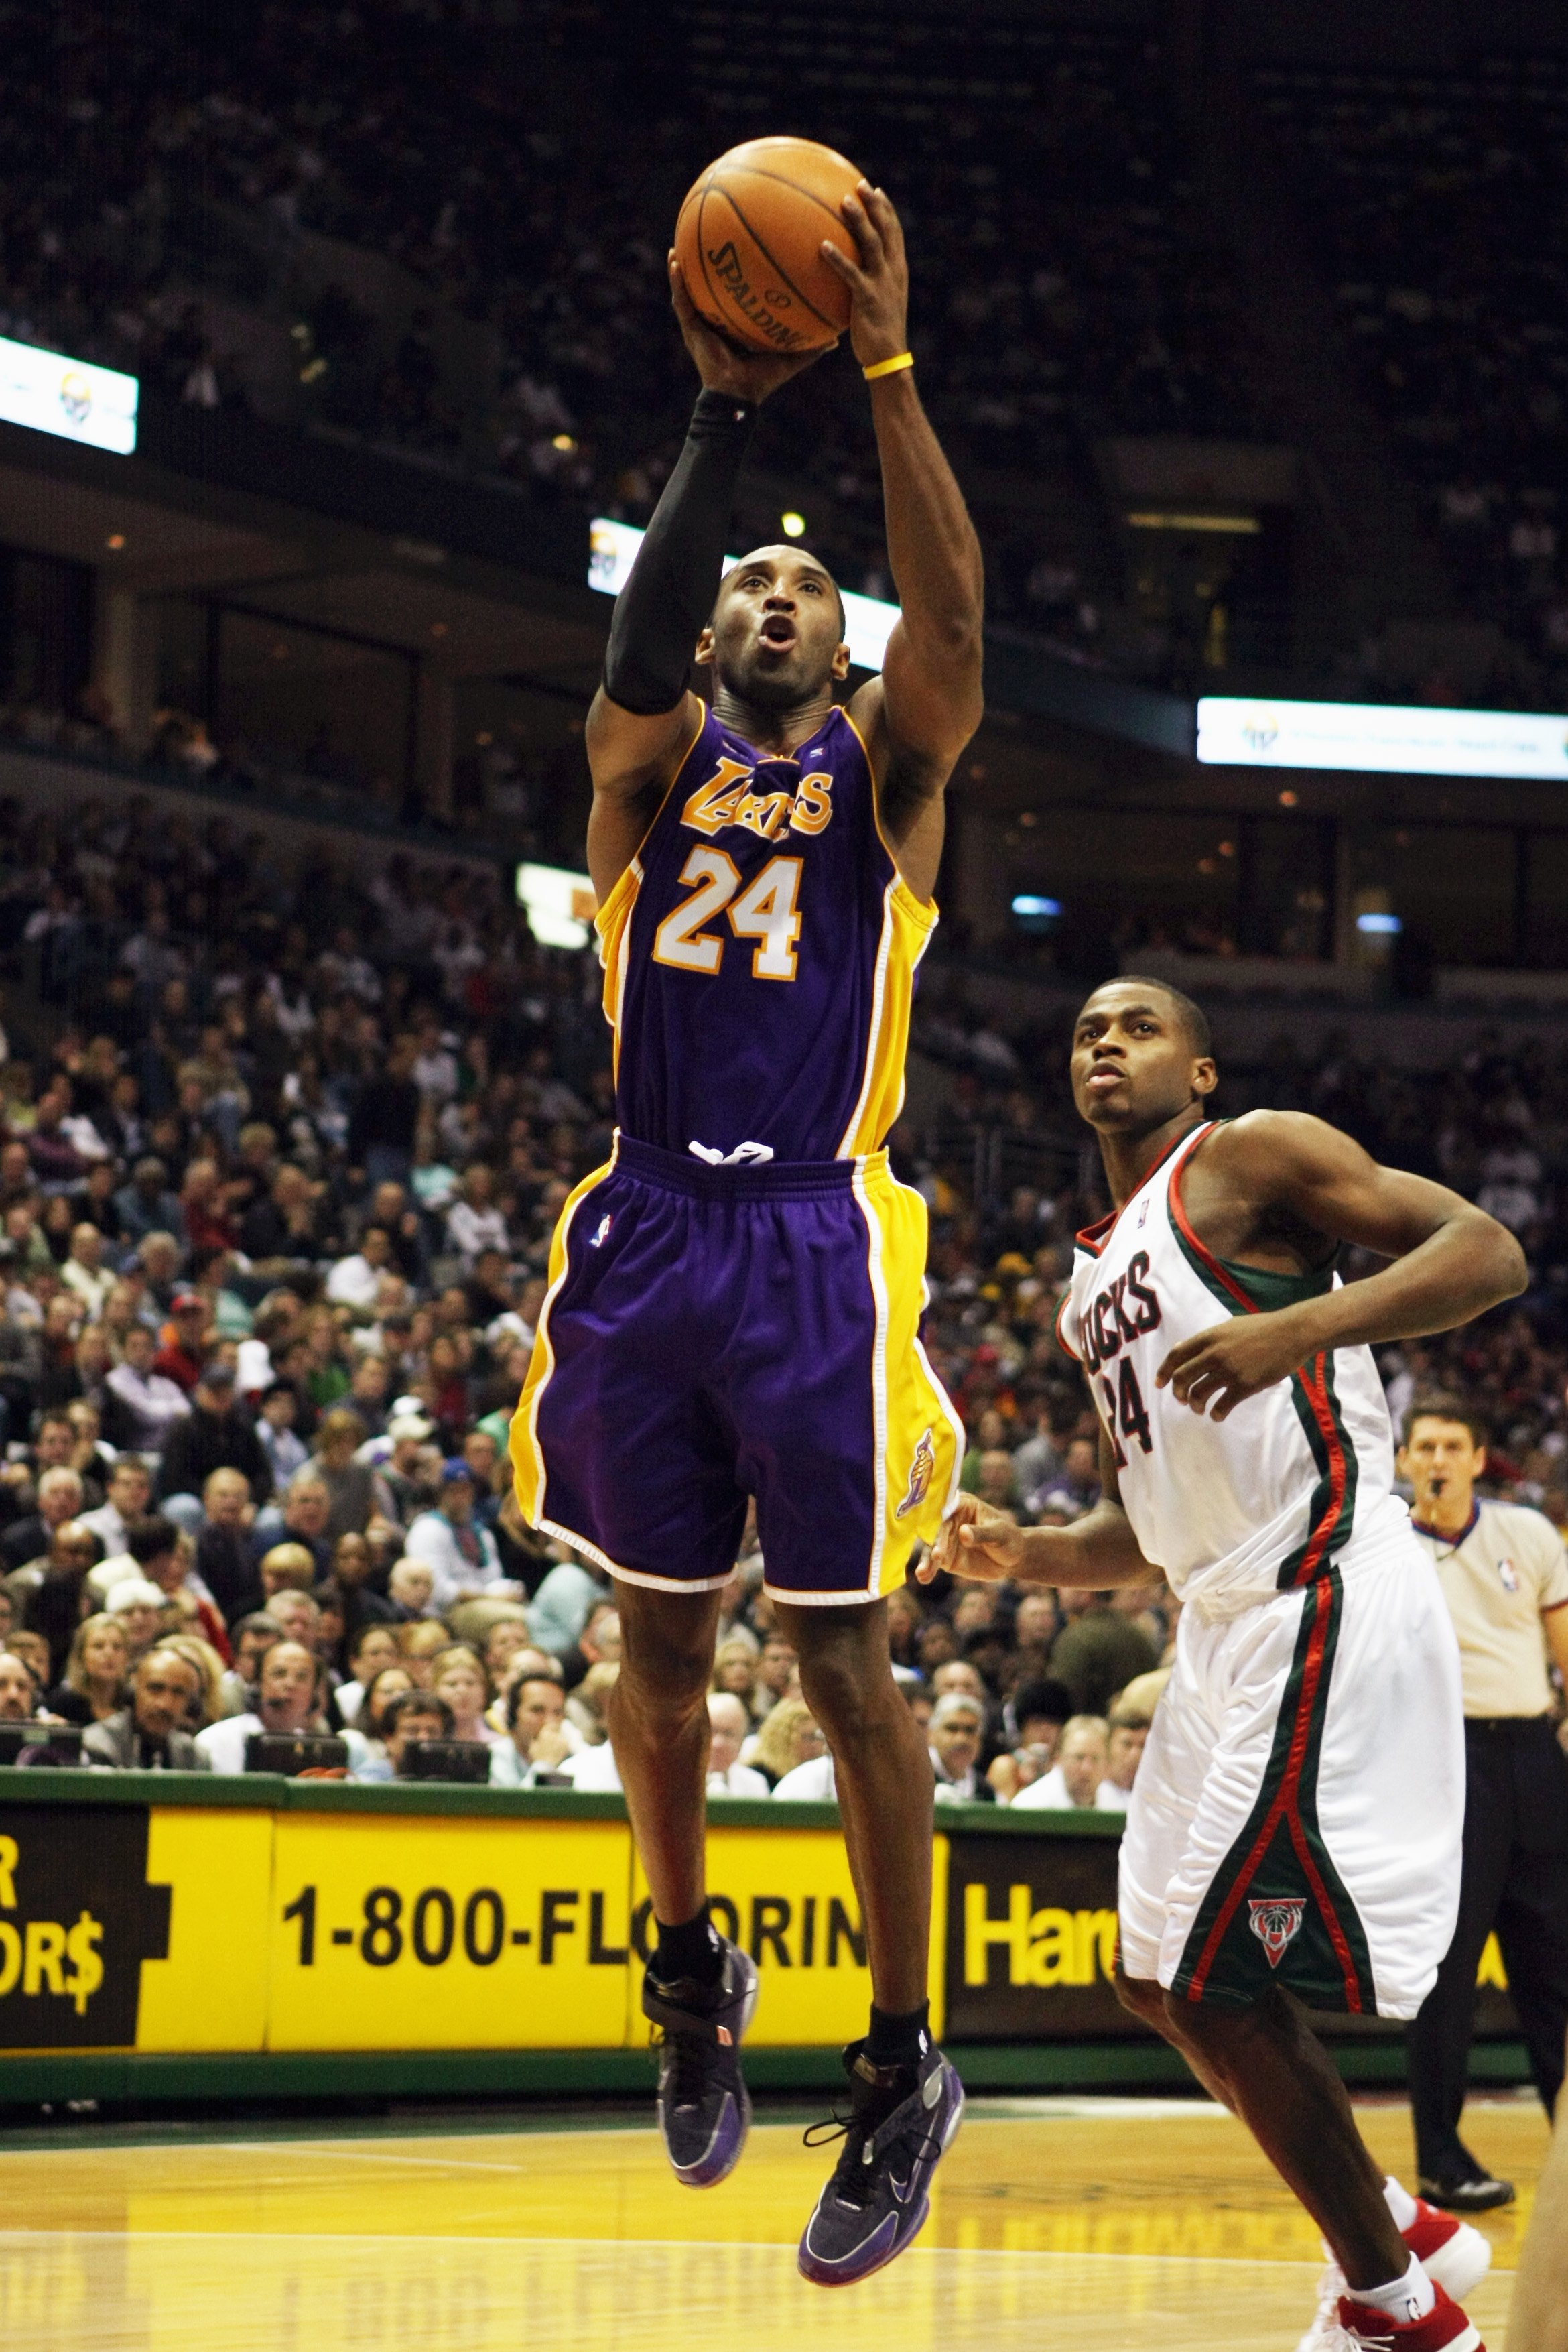 MILWAUKEE - NOVEMBER 21:  Kobe Bryant #24 of the Los Angeles Lakers goes up for a shot against Desmond Mason #24 of the Milwaukee Bucks during the game at the Bradley Center on November 21, 2007 in Milwaukee, Wisconsin.  The Bucks won 110-103.  NOTE TO US